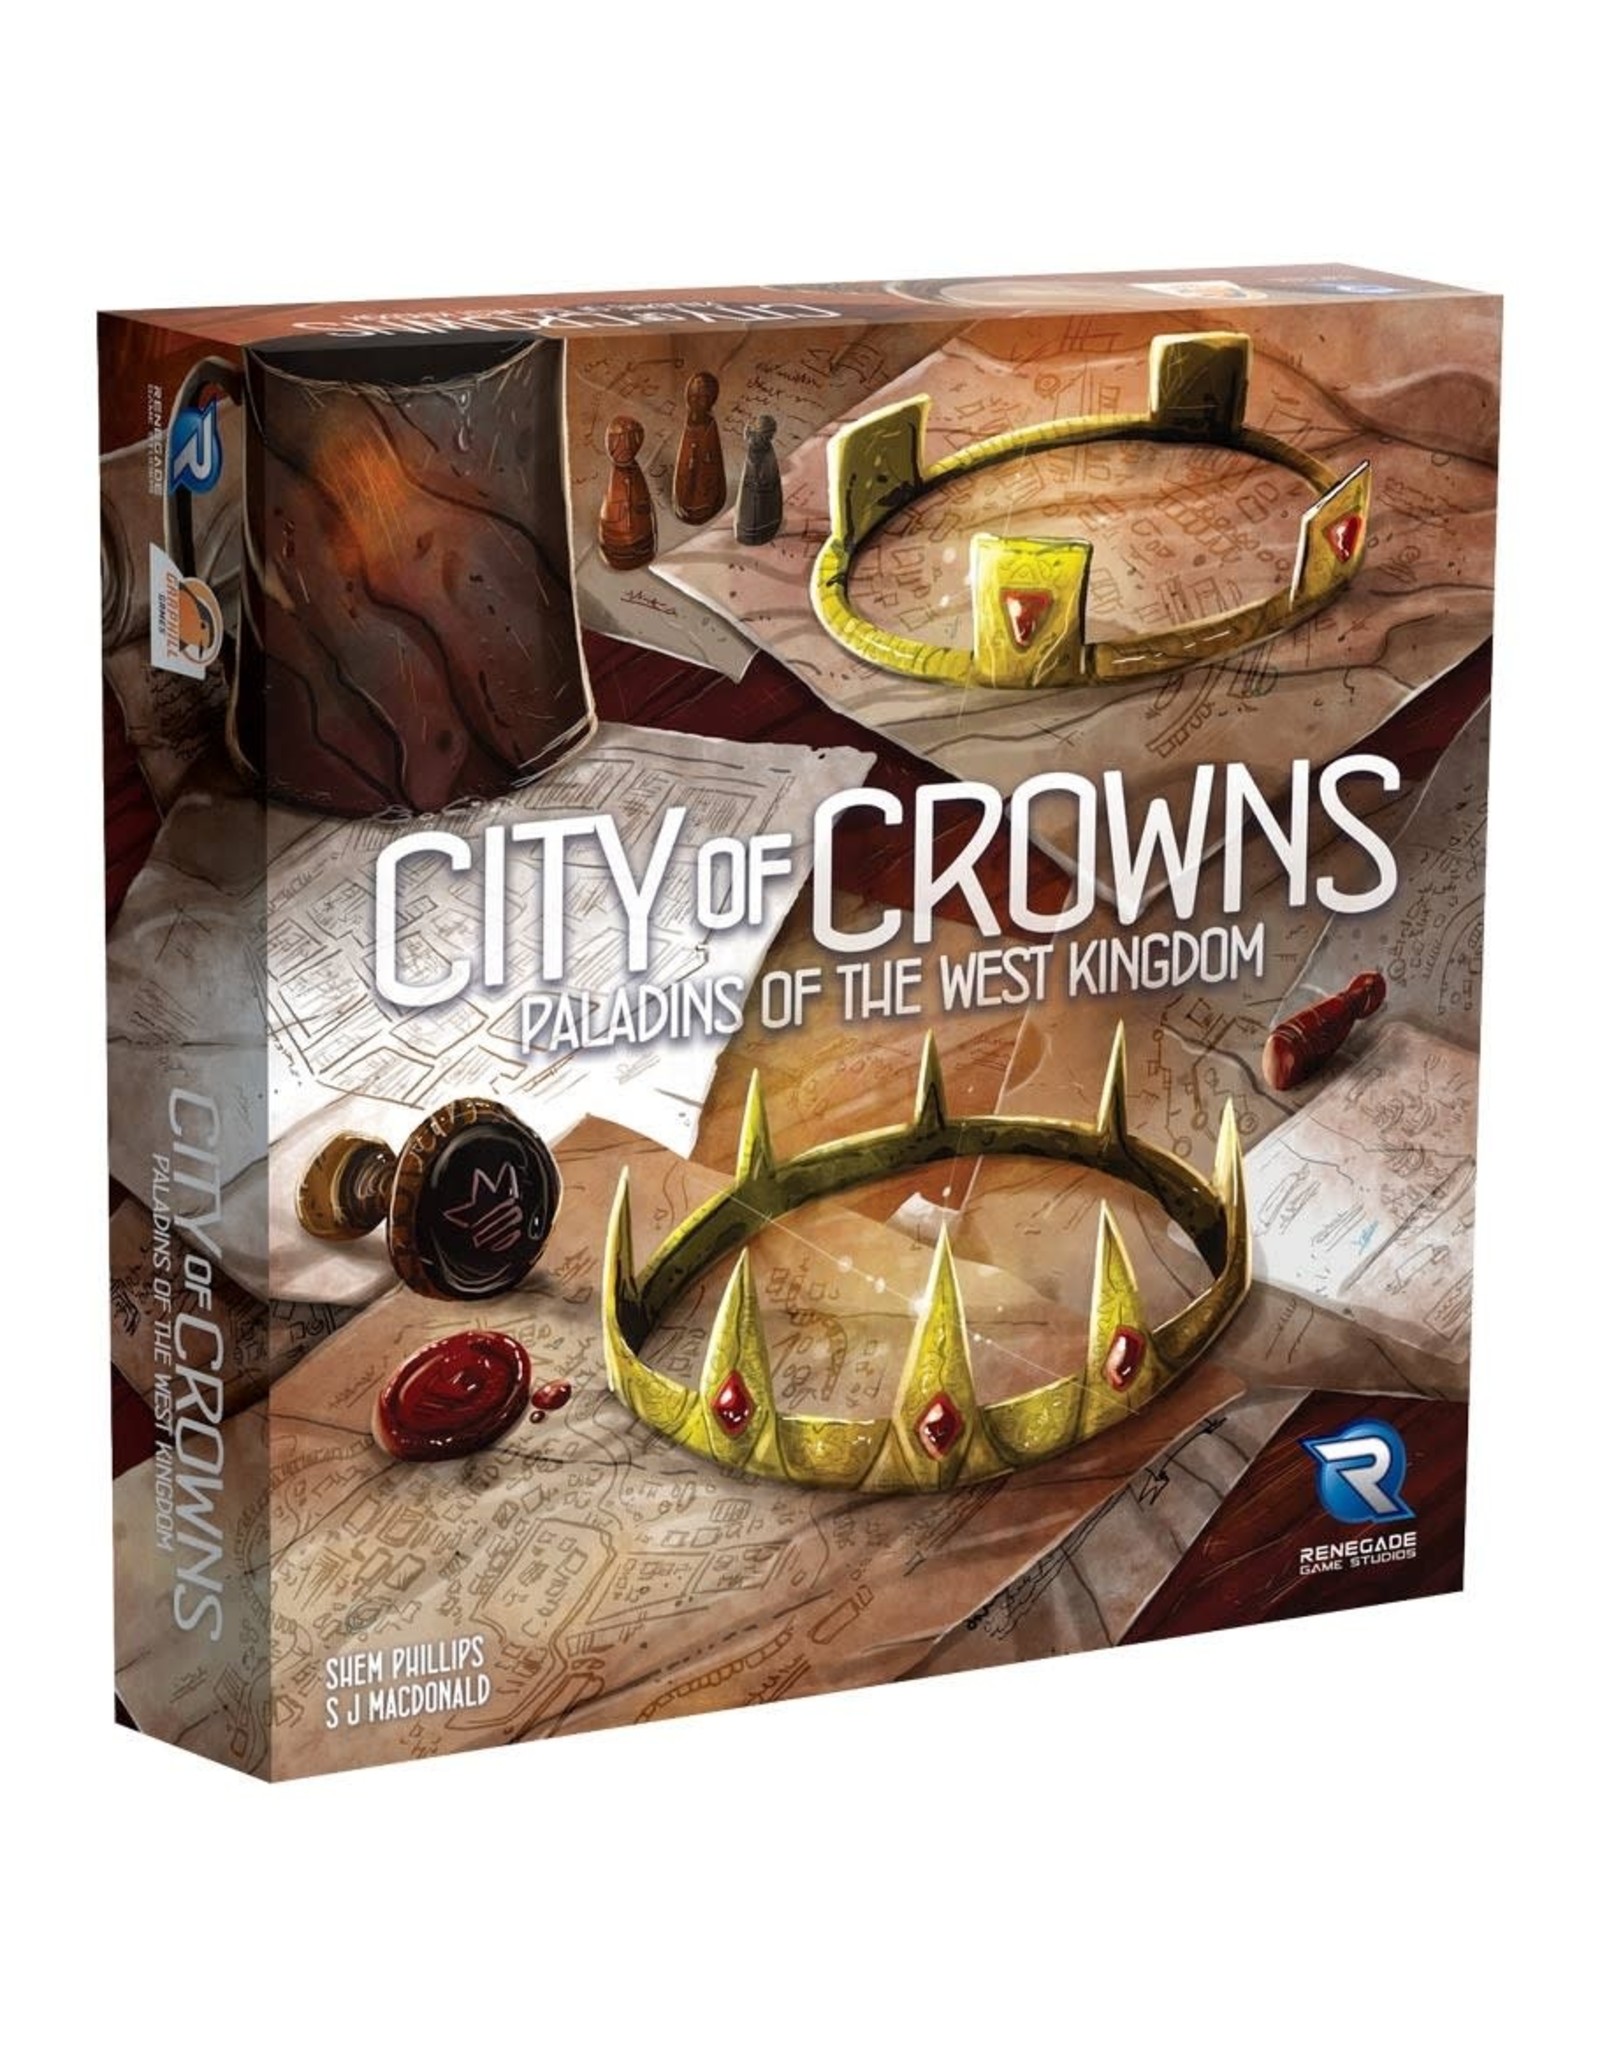 Renegade Paladins of the West Kingdom: City of Crowns